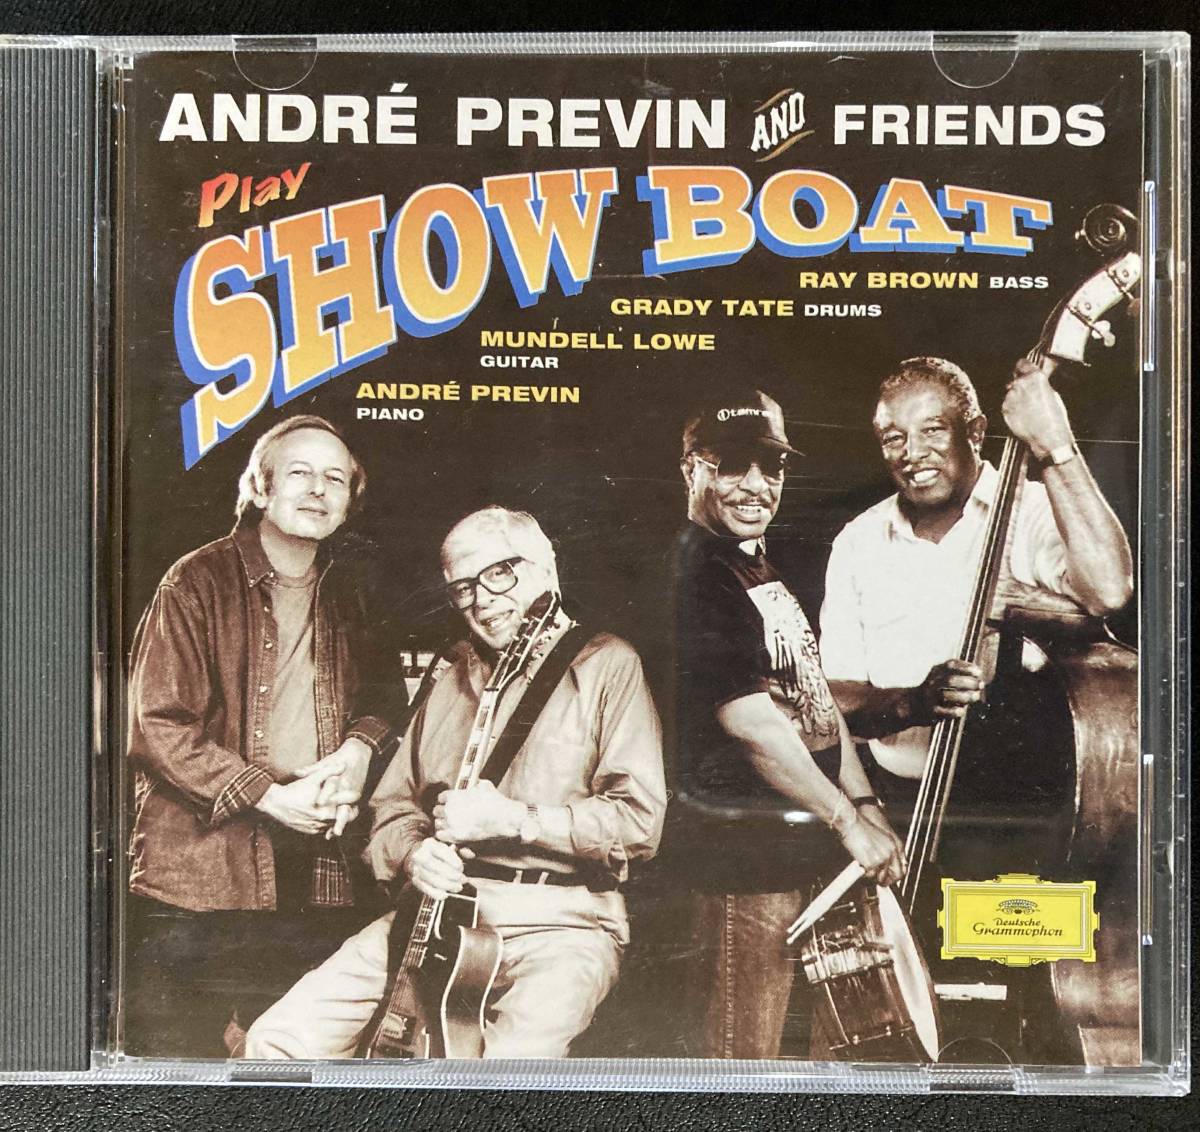 Andre Previn and Friends Play Show Boat / Andre Previn 中古CD　USA盤_画像2